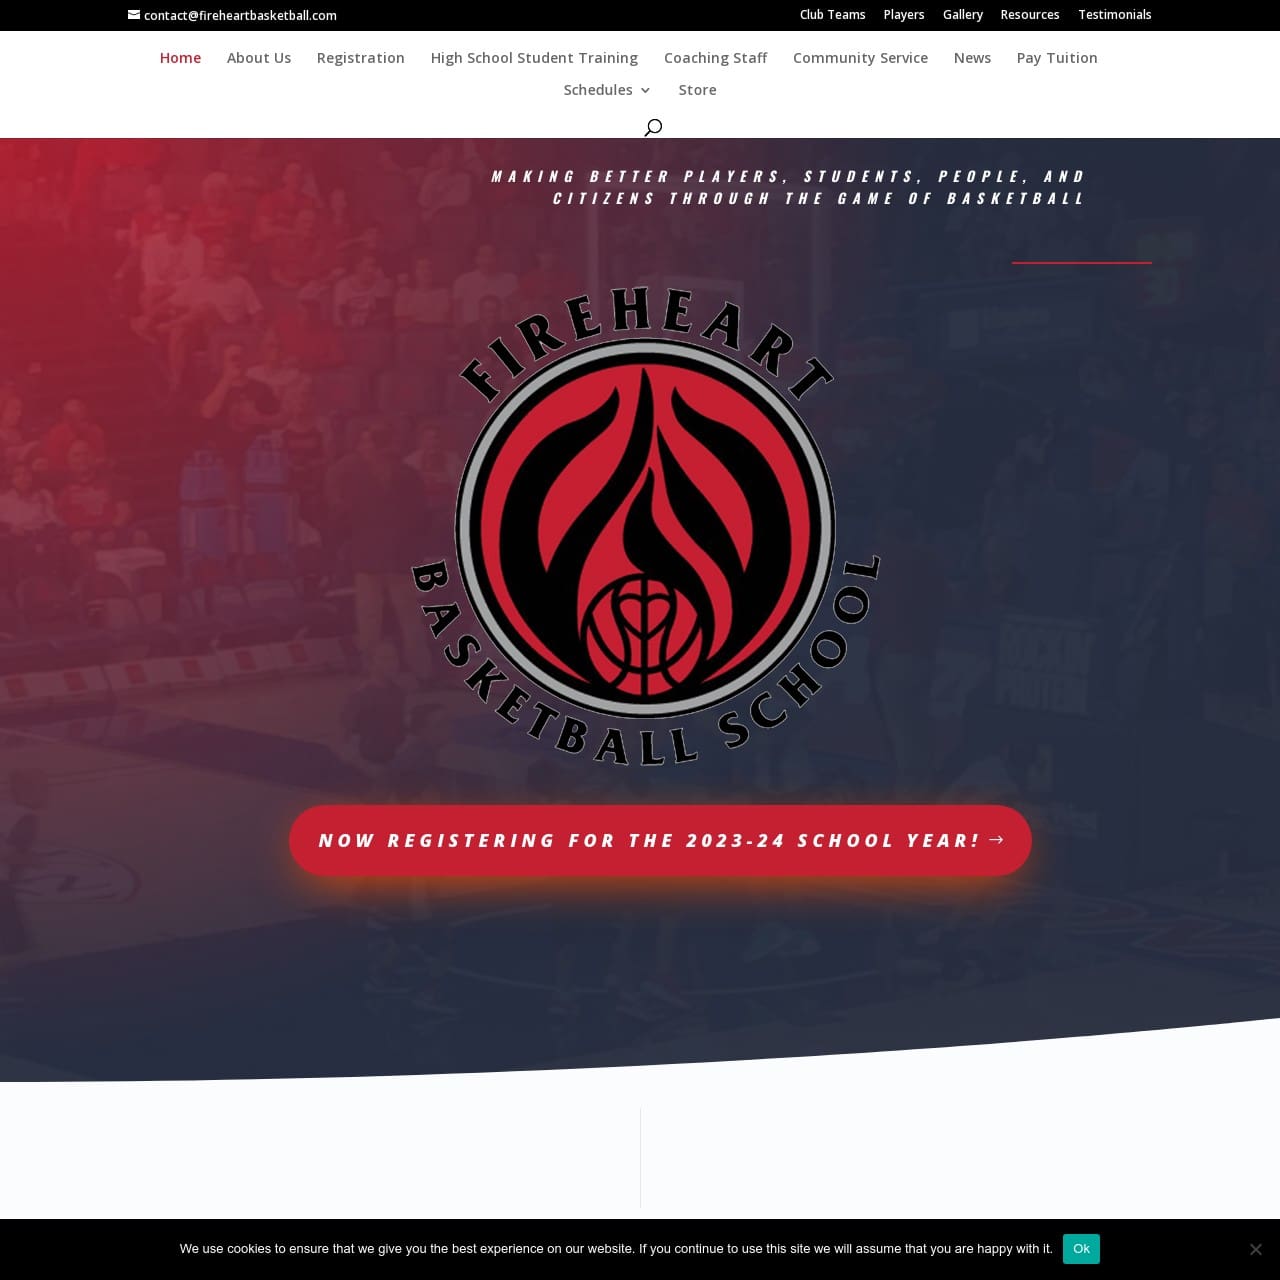 Witness the power of resilience and teamwork as Shield Bar Marketing creates a central hub for FireHeart Basketball School, complete with a dynamic website and seamless online payment options, enabling aspiring players to embrace life and basketball skills.